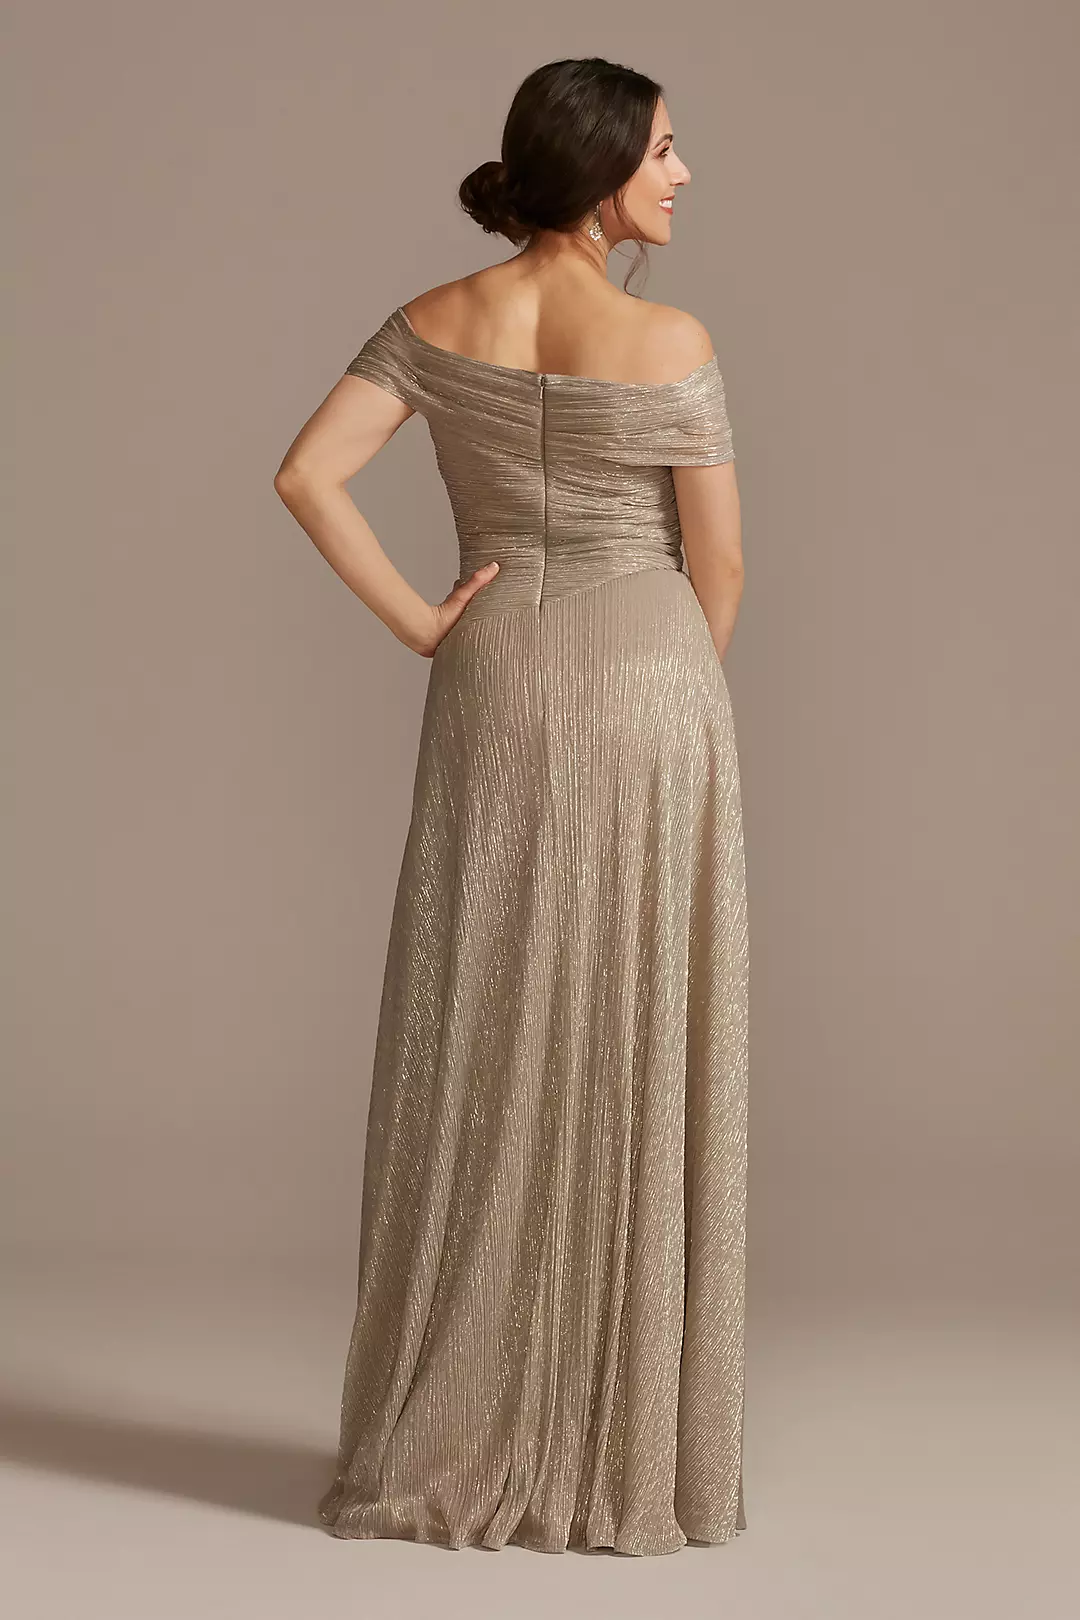 Pleated Metallic Off-the-Shoulder Dress Image 2